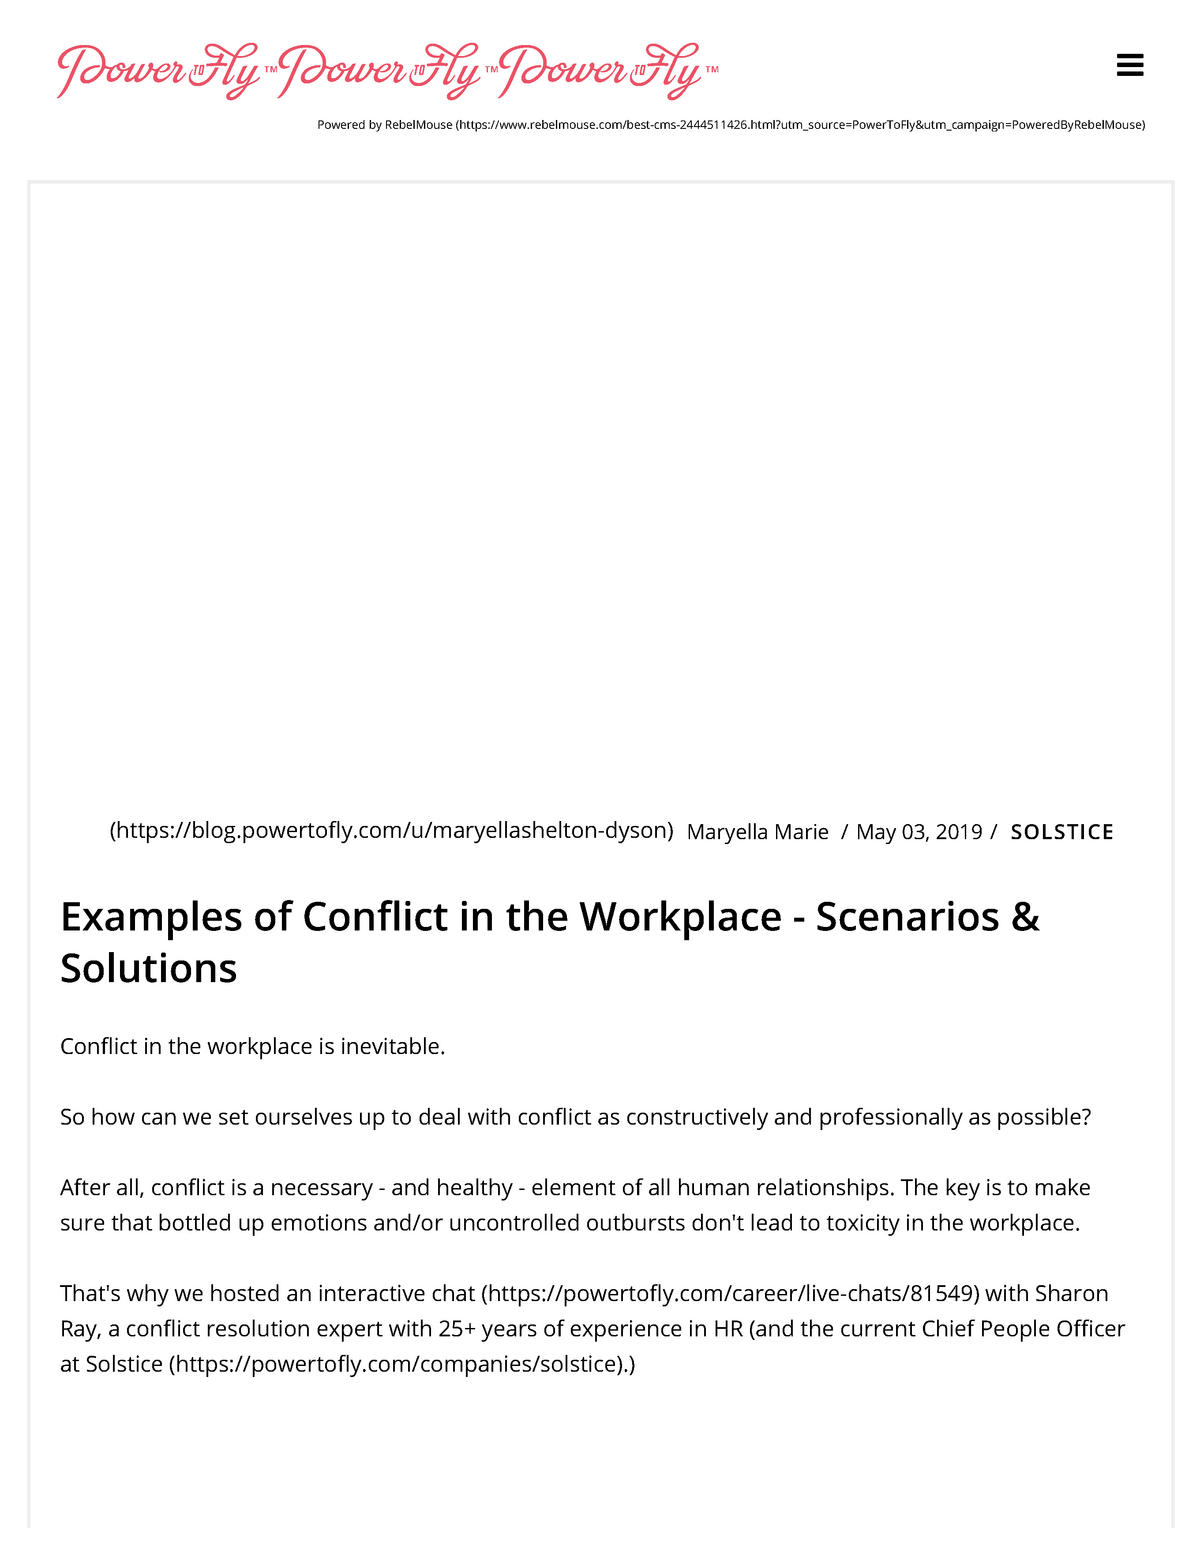 thesis on conflict management in the workplace pdf